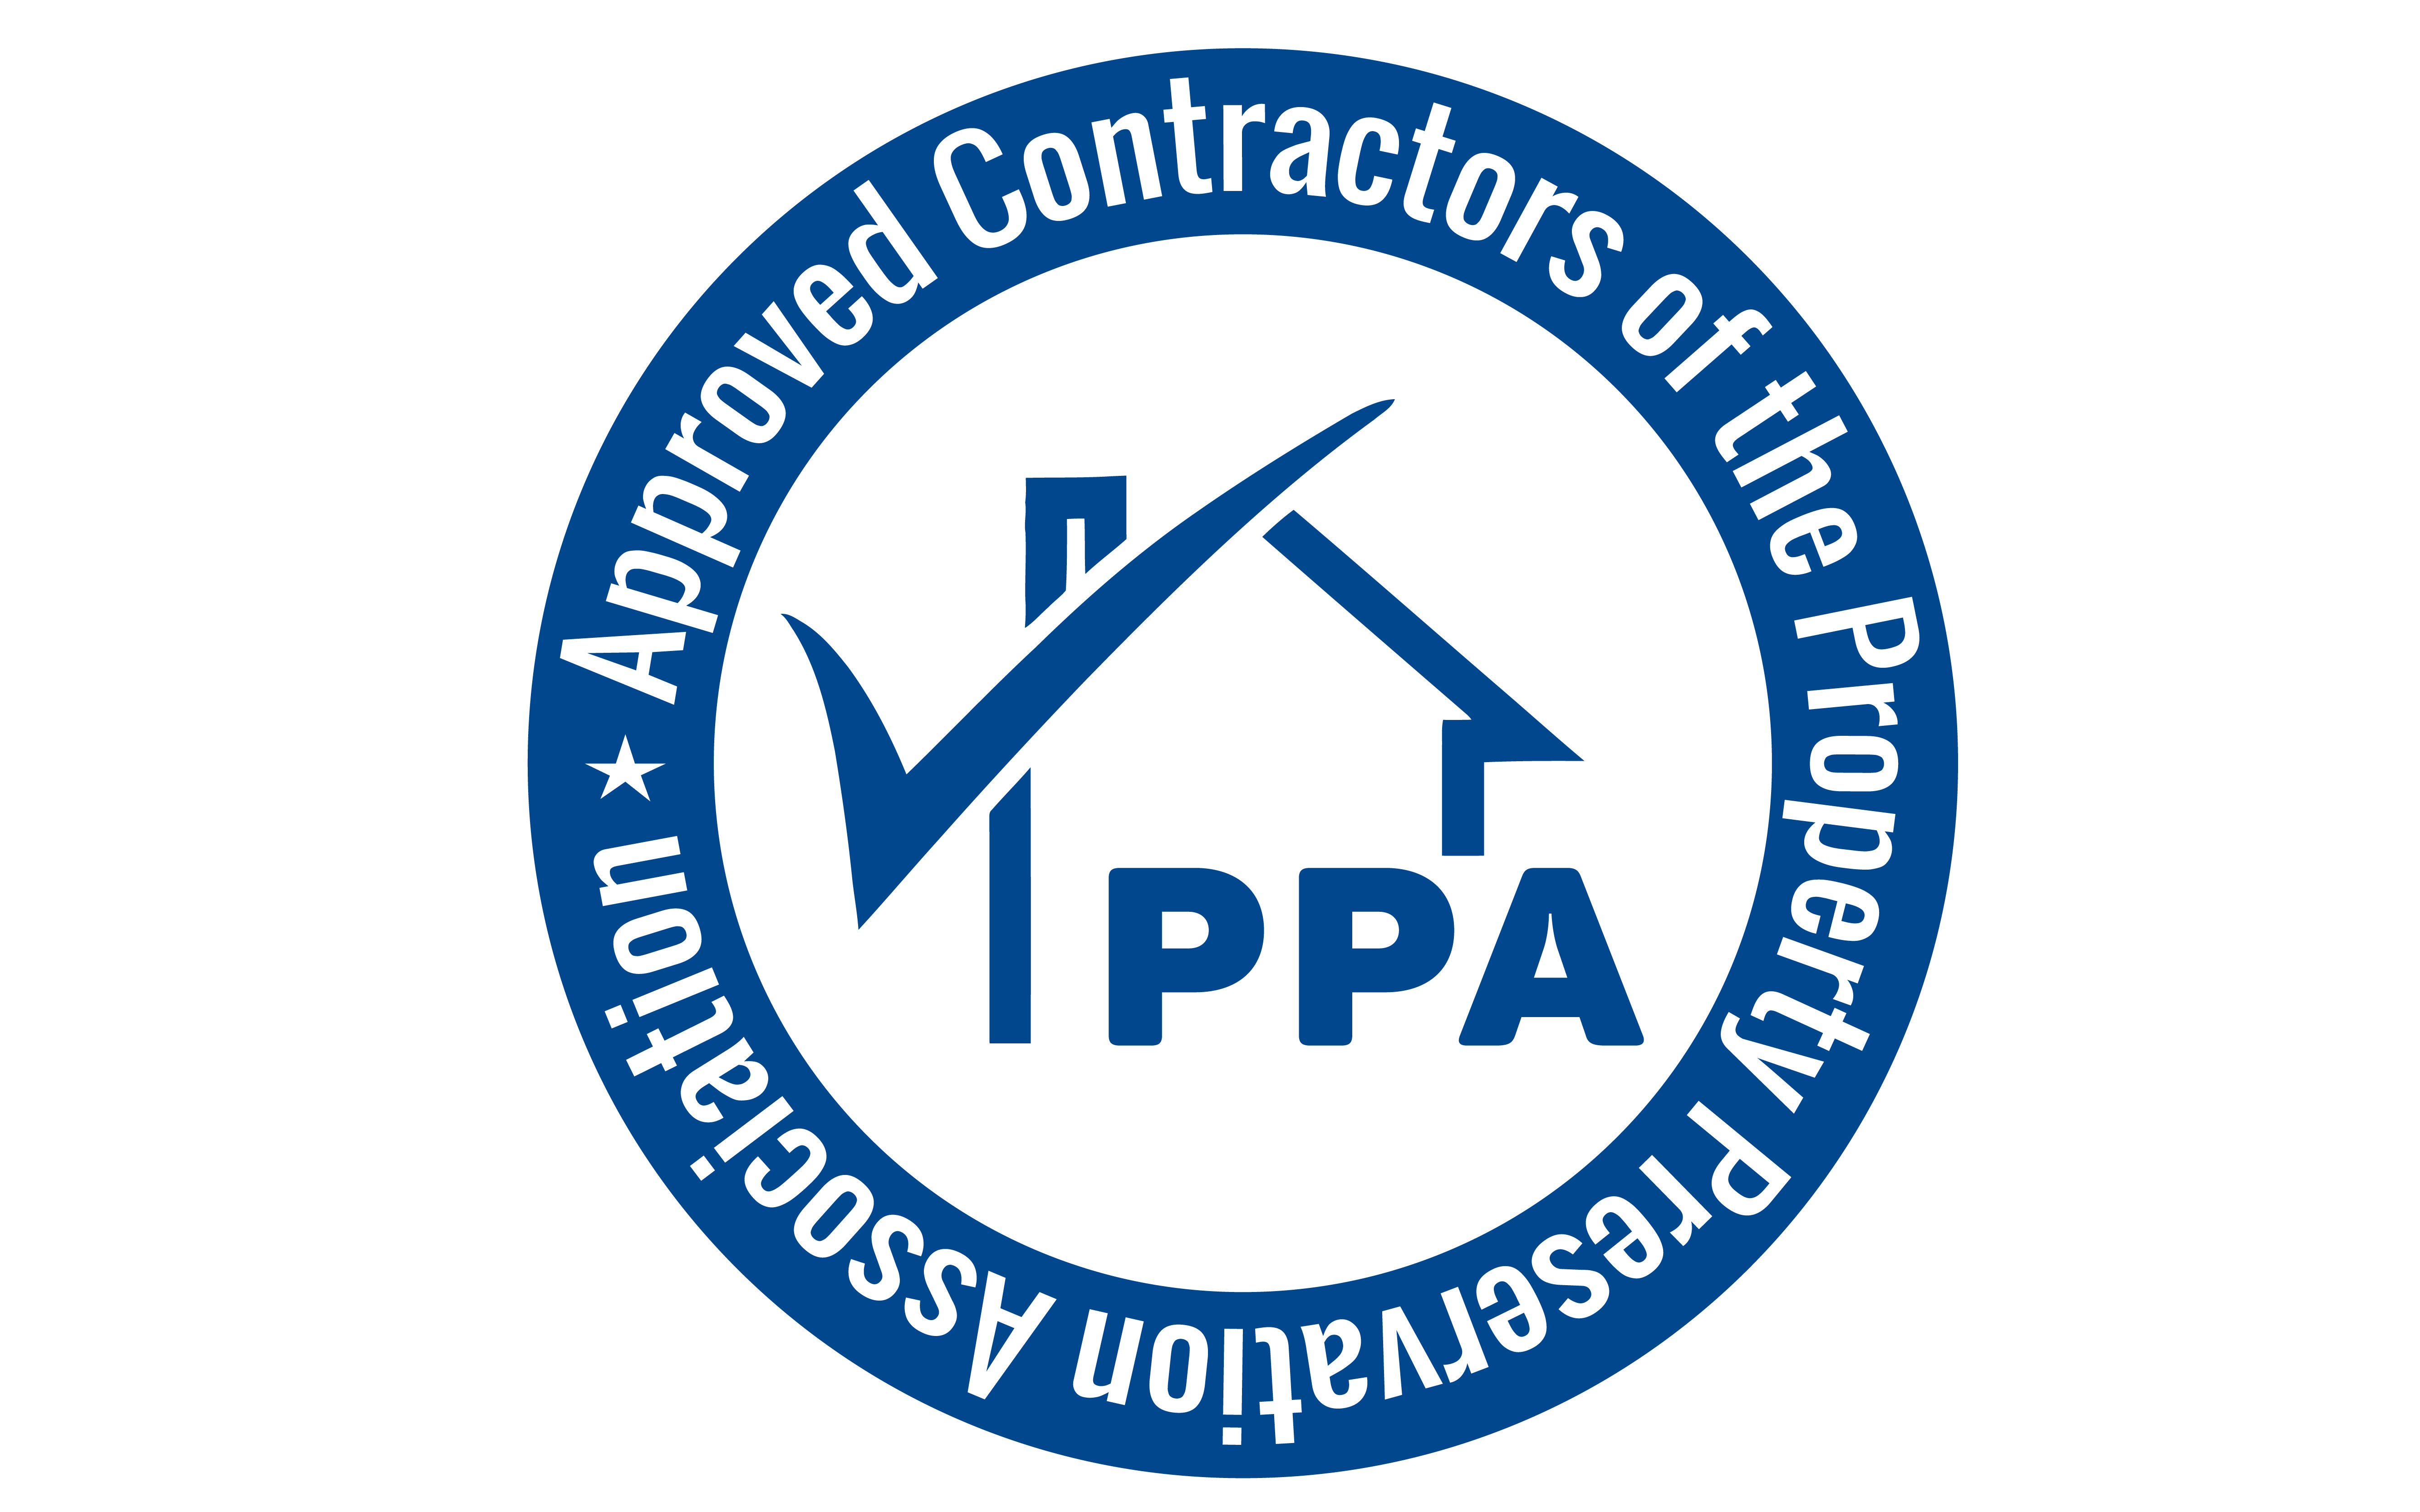 APPROVED CONTRACTORS OF THE PROPERTY PRESERVATION ASSOCIATION